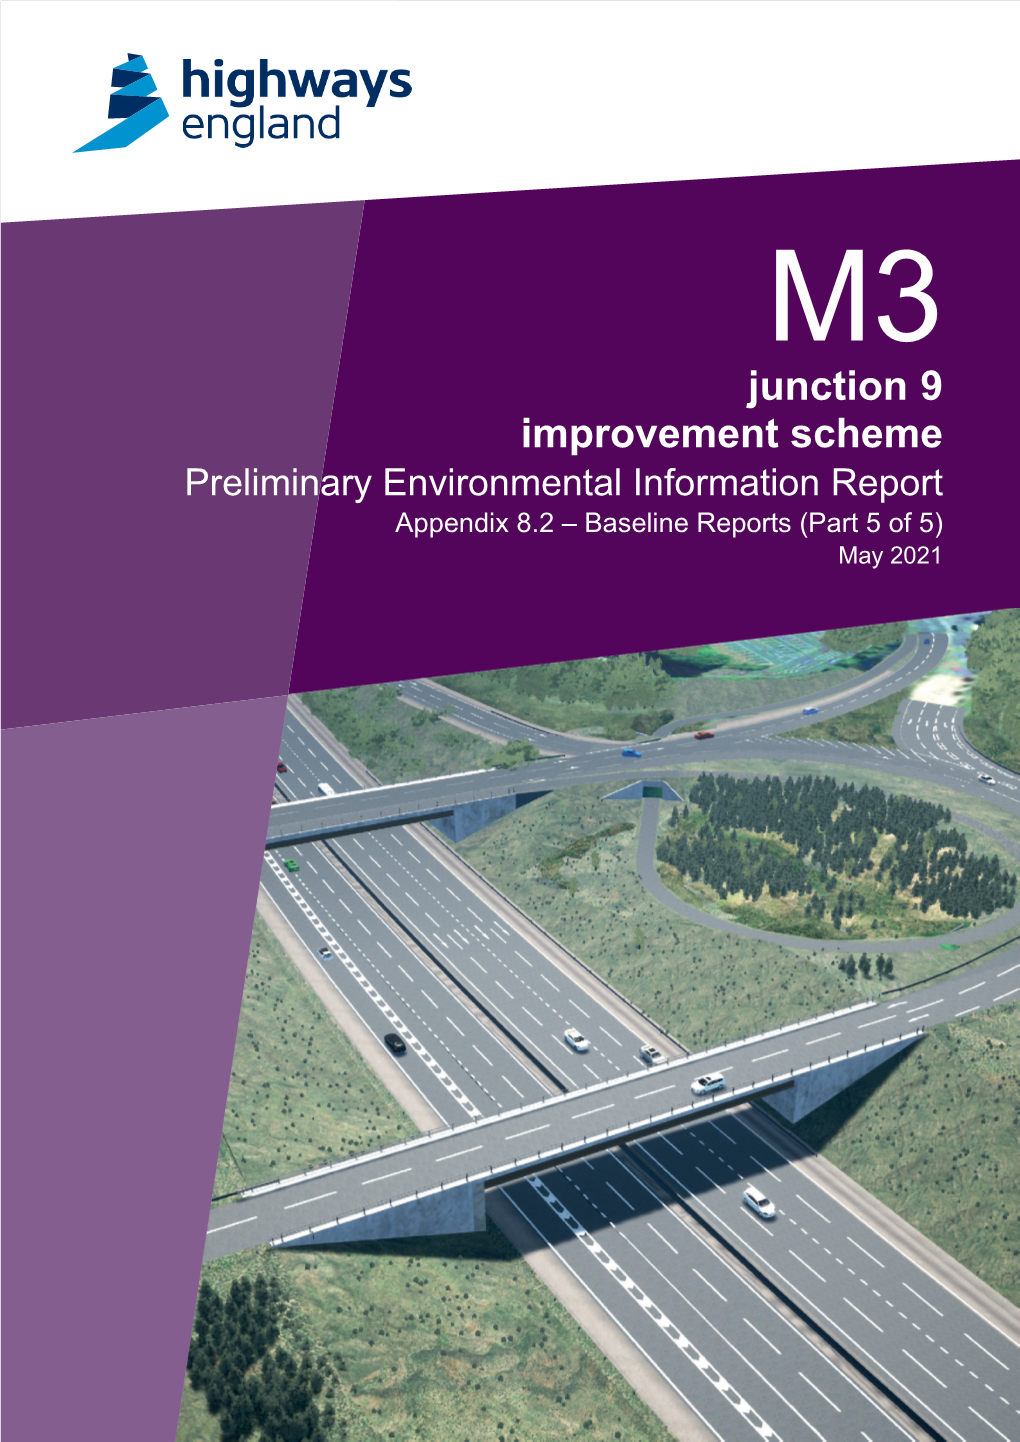 M3 Junction 9 Improvement Scheme Preliminary Environmental Information Report Appendix 8.2 – Baseline Reports (Part 5 of 5) May 2021